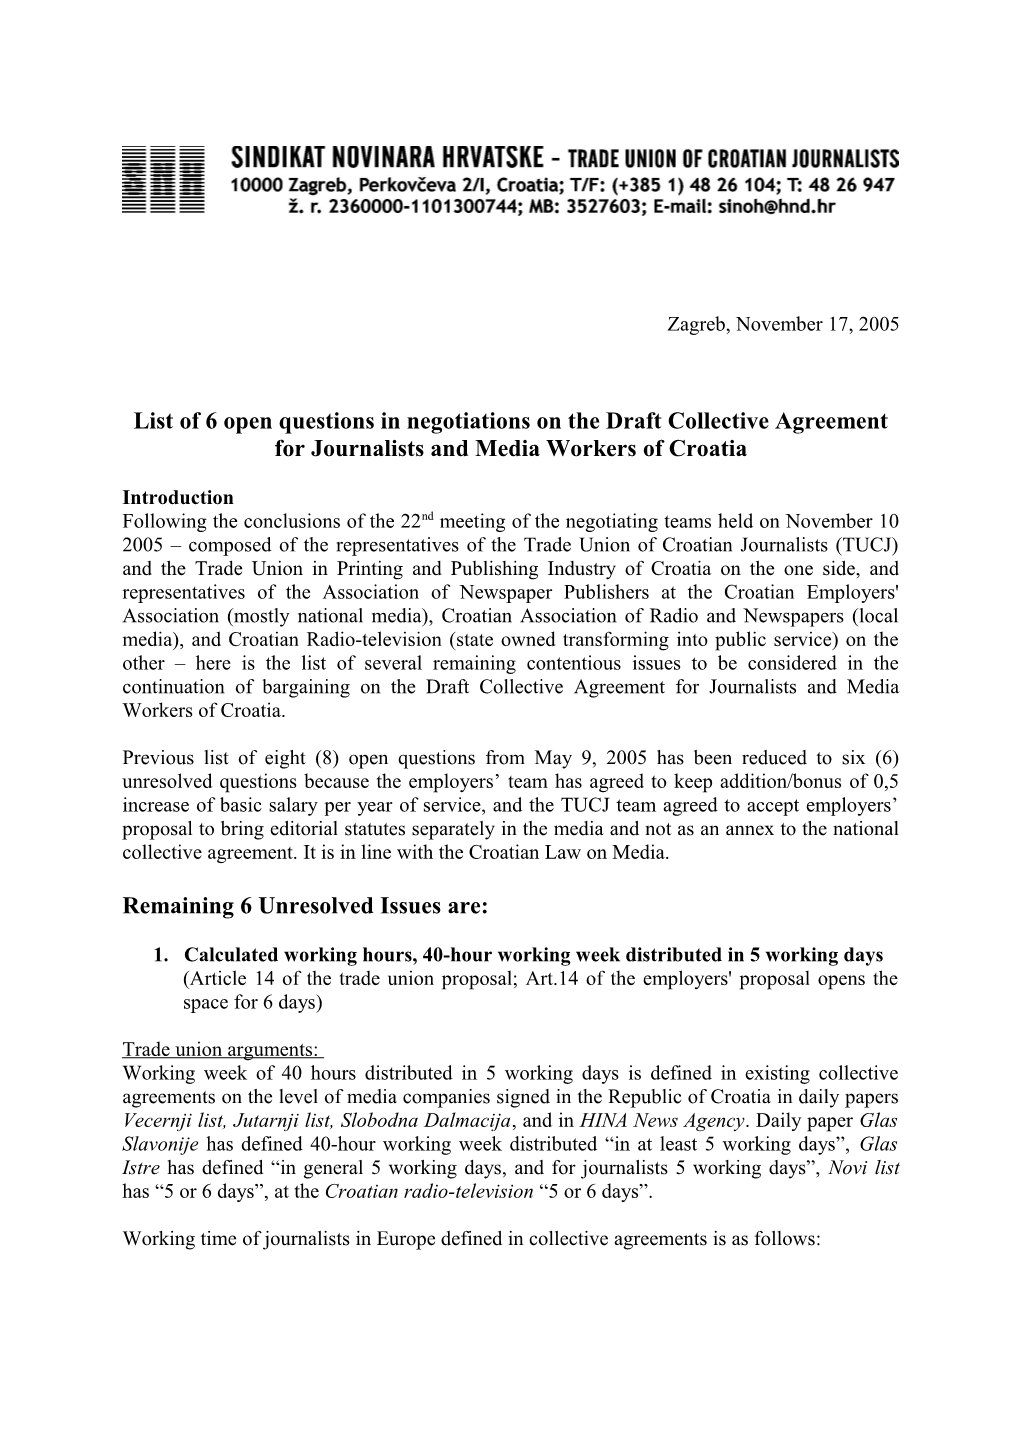 List of 6 Open Questions in Negotiations on the Draft Collective Agreement for Journalists